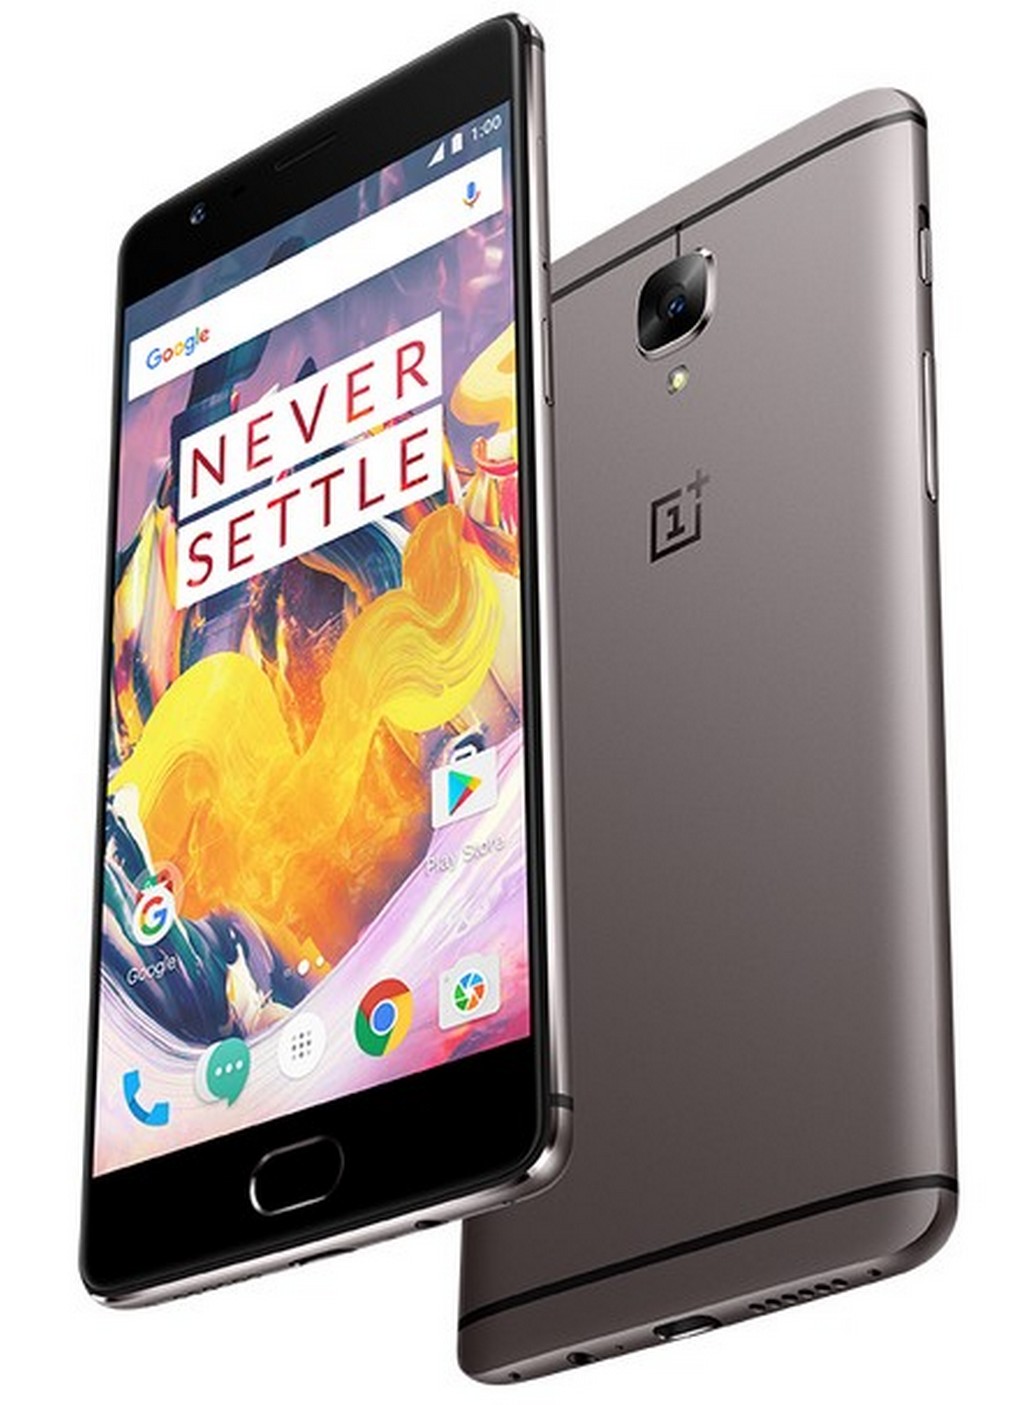 OnePlus 3T Colette Edition